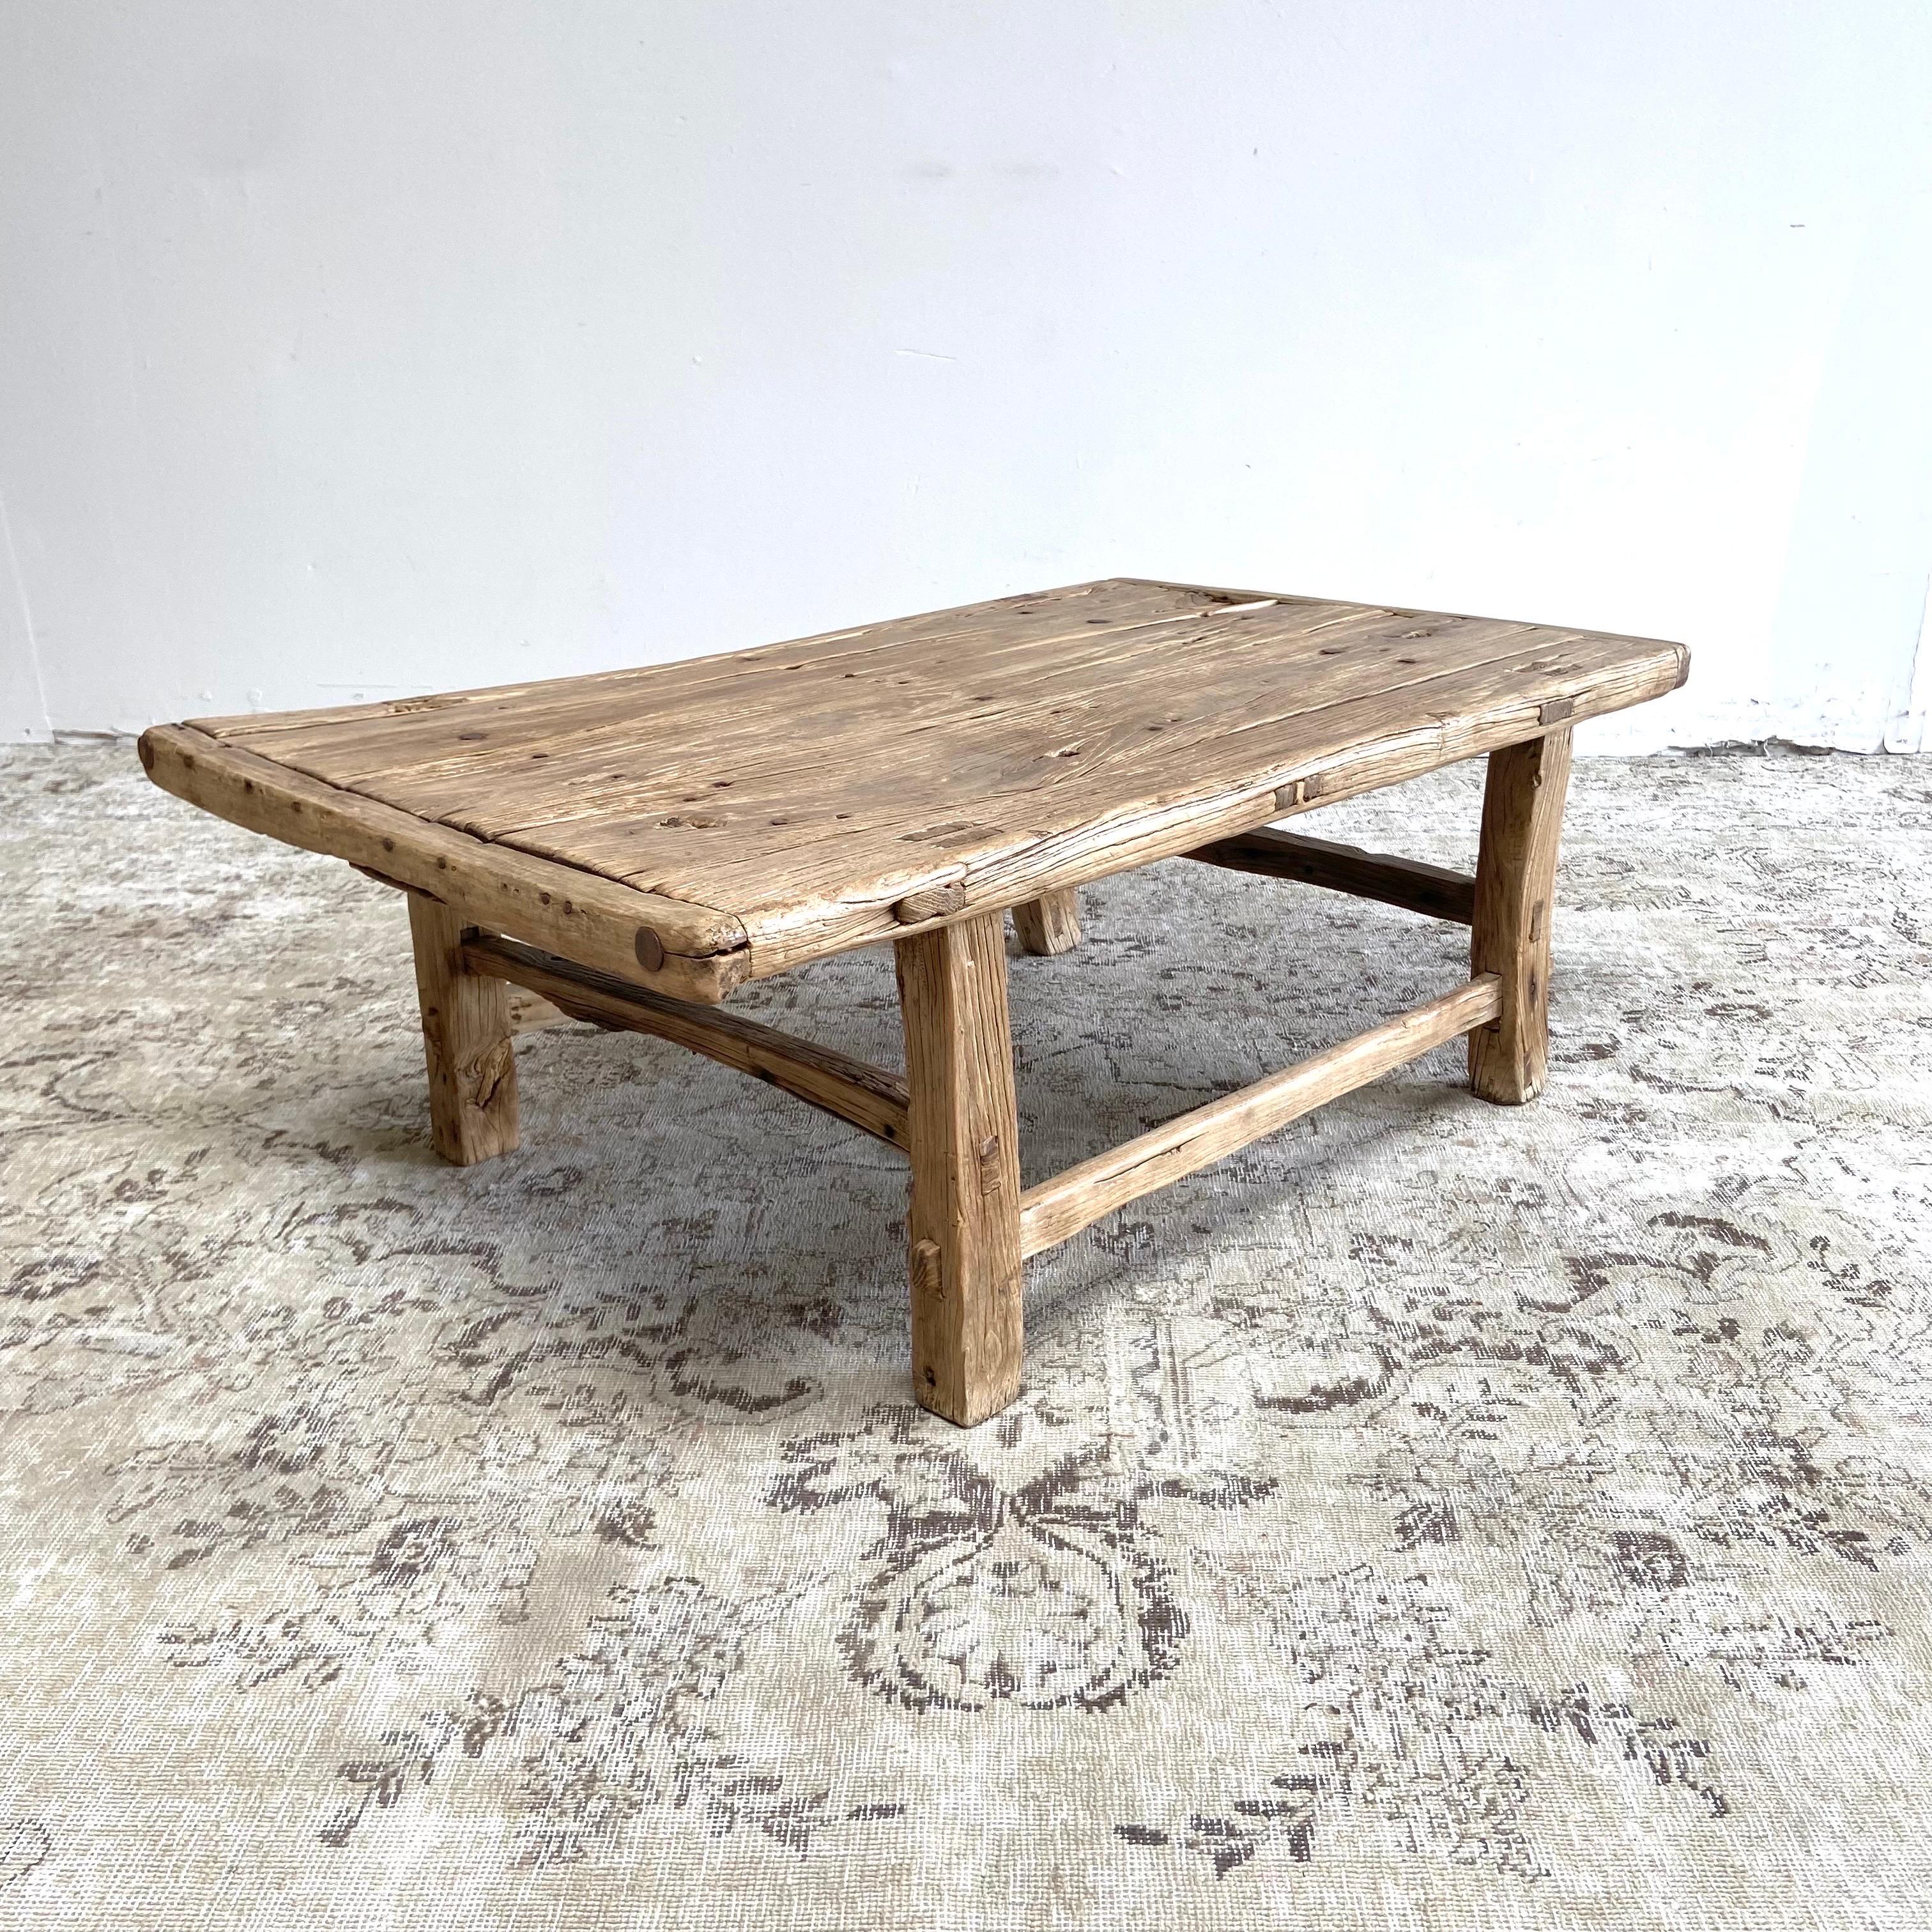 Vintage antique elmwood coffee table with beautiful antique weathered patina top
Beautiful antique patina, with weathering and age, these are solid and sturdy ready for daily use, use as a coffee table or entry bench. Each piece is truly unique and